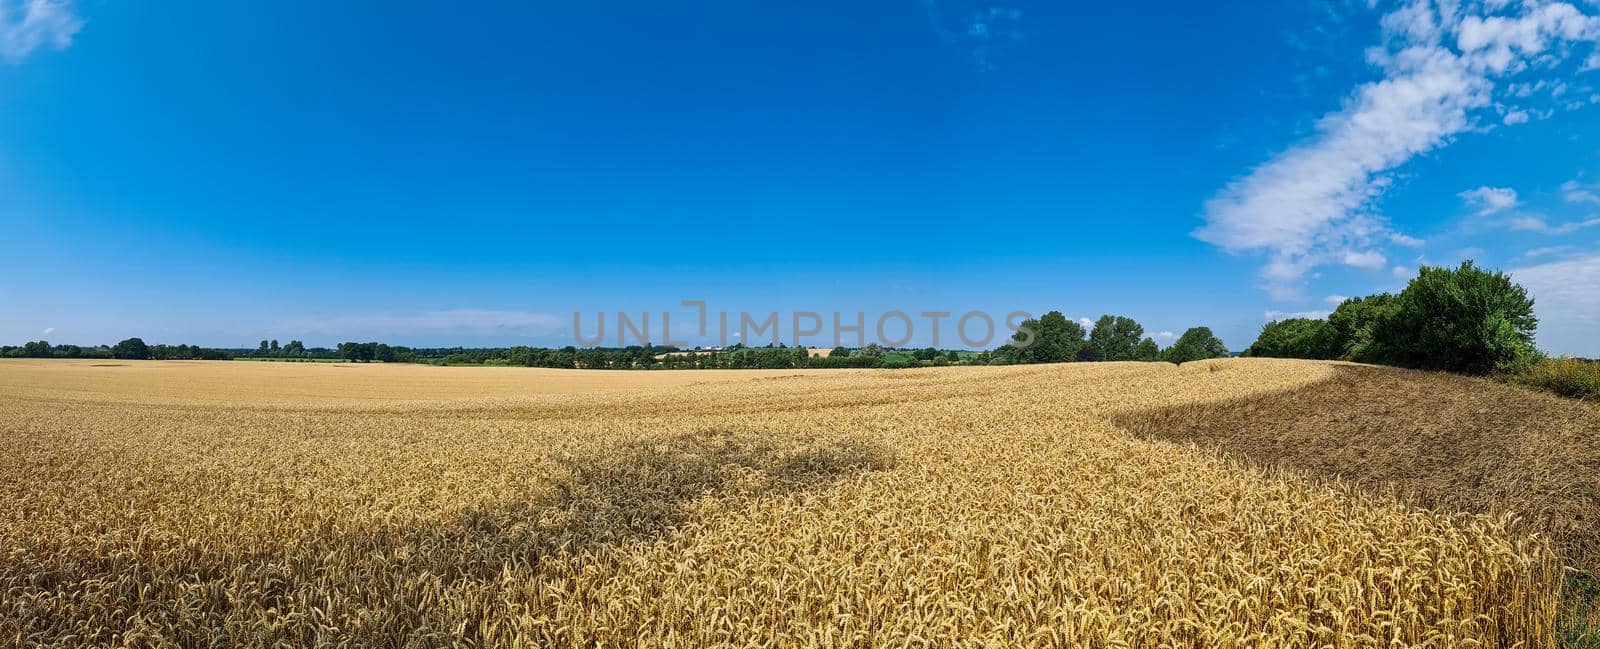 Summer view on agricultural crop and wheat fields ready for harvesting by MP_foto71